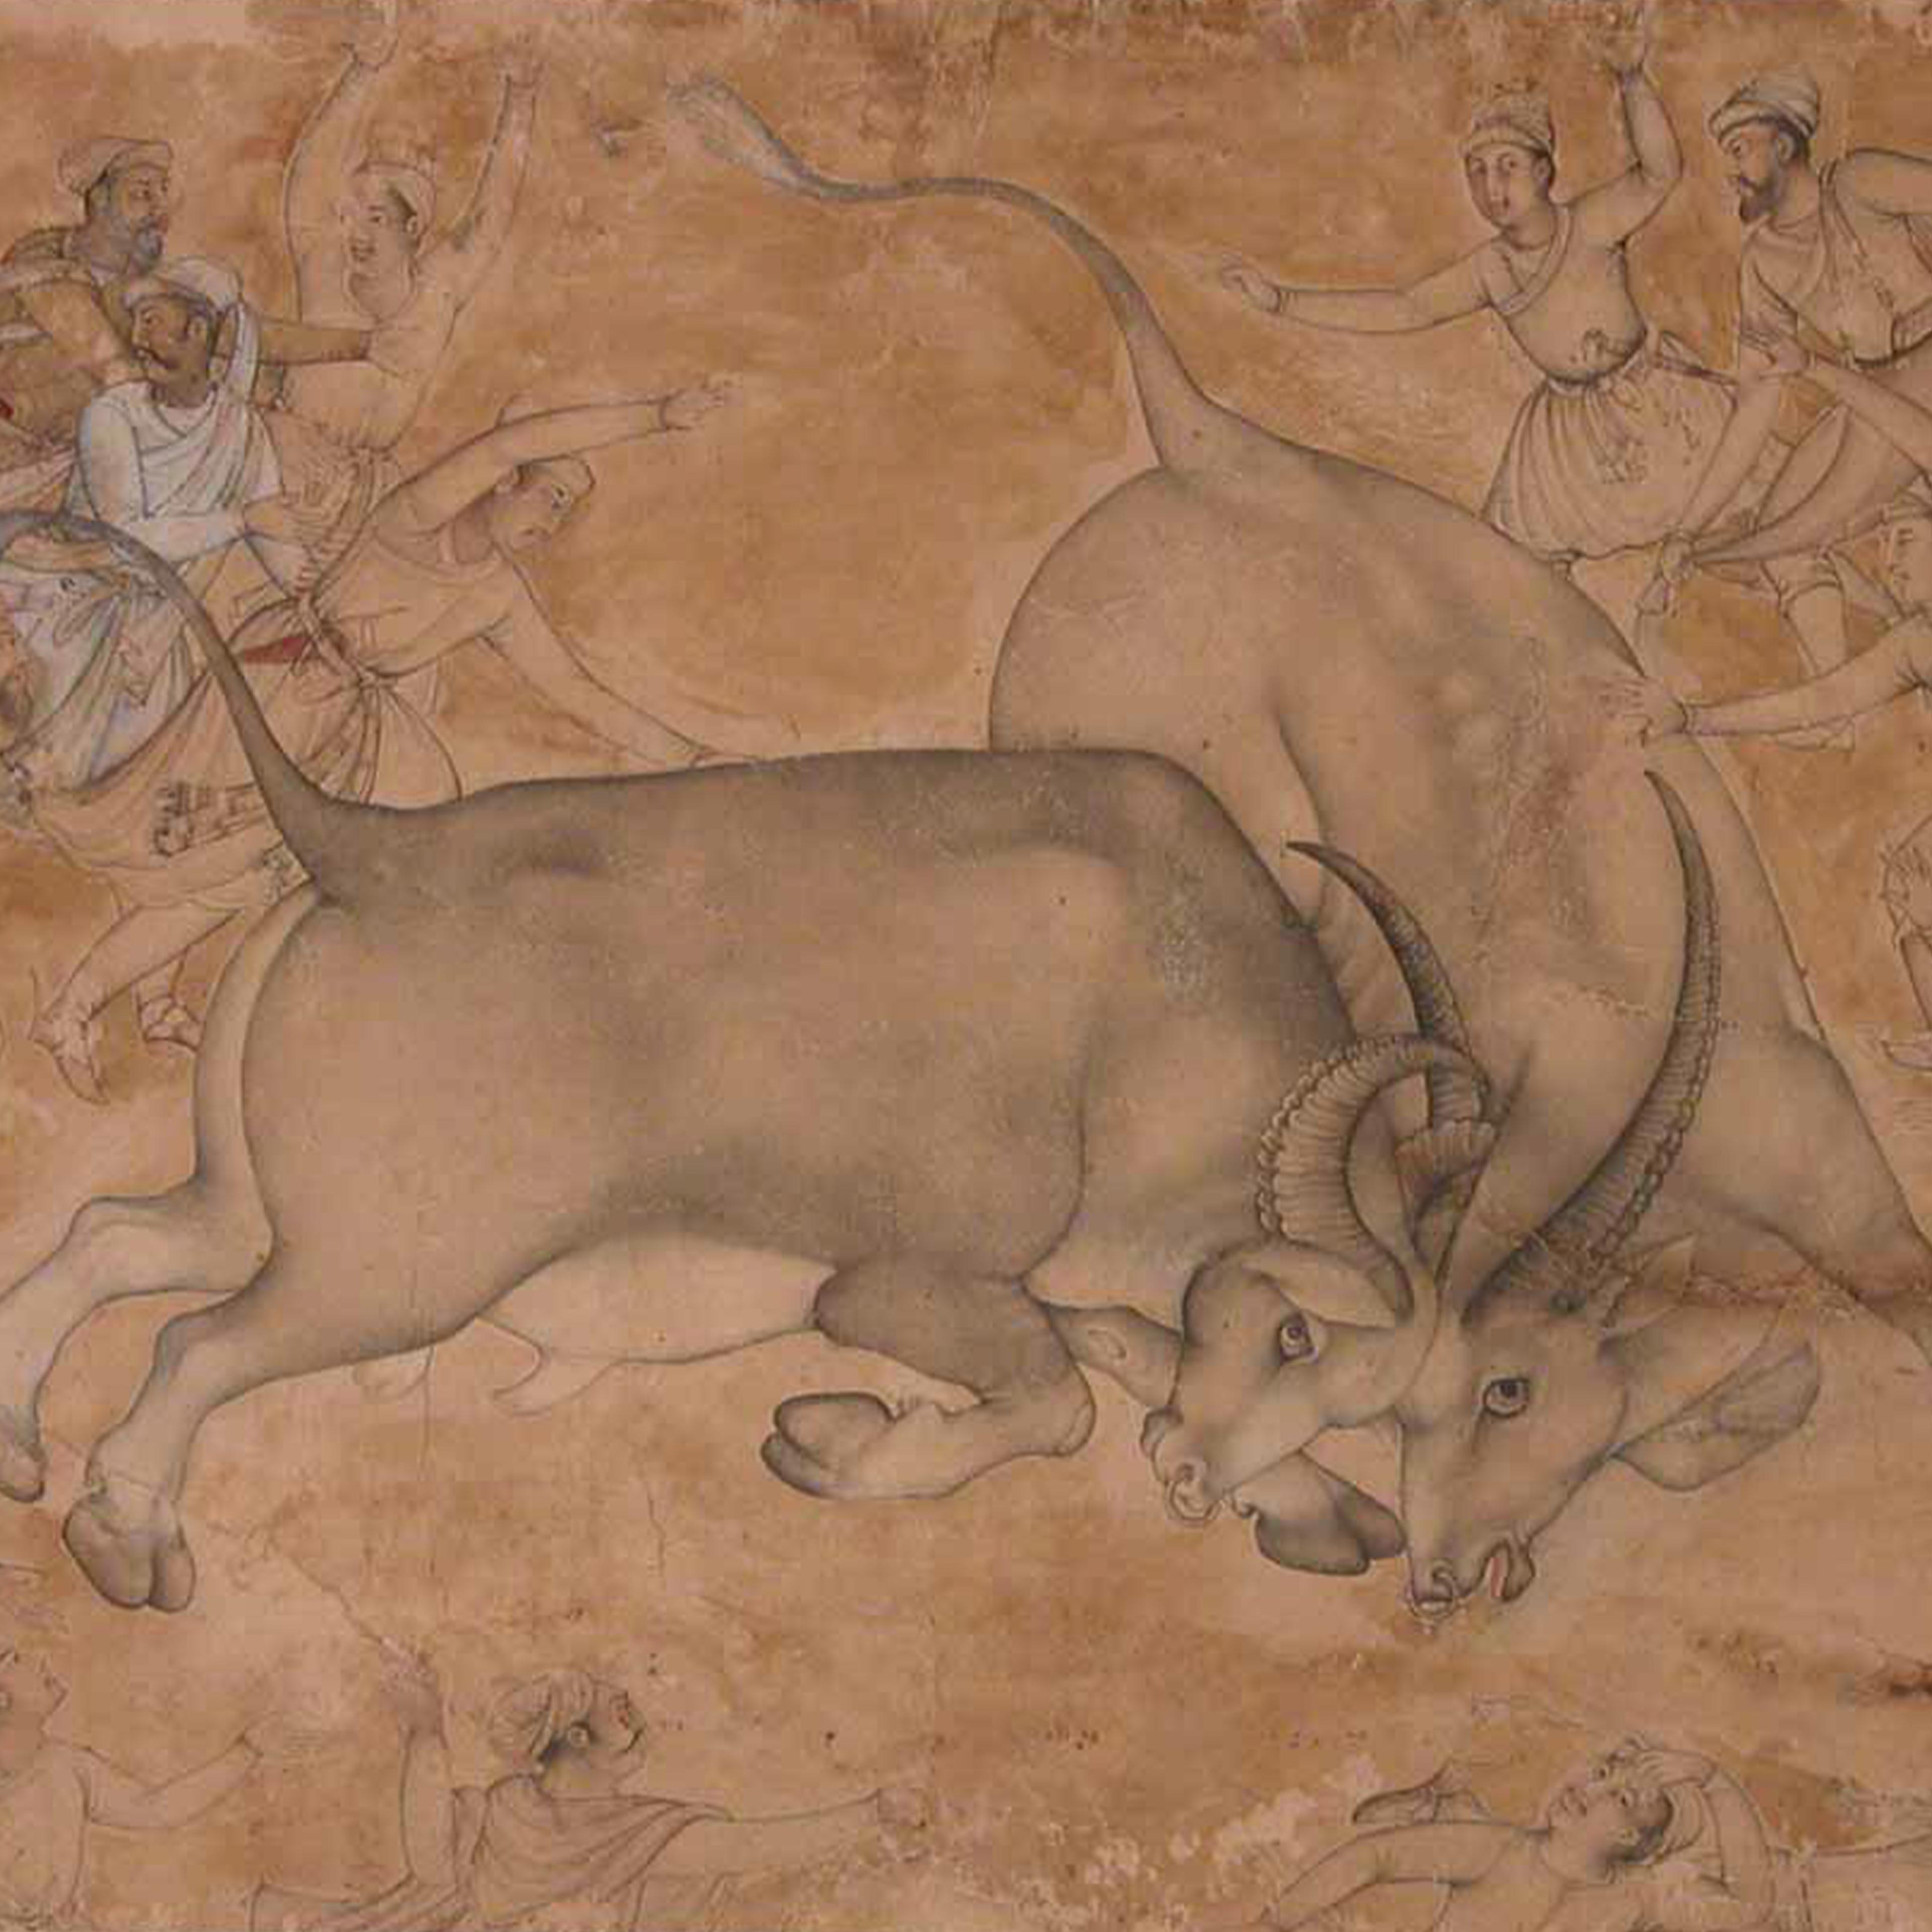 An ancient fresco depicts a dynamic scene where multiple figures attempt to subdue a large, powerful bull, showcasing the artistic style and storytelling of a bygone era.